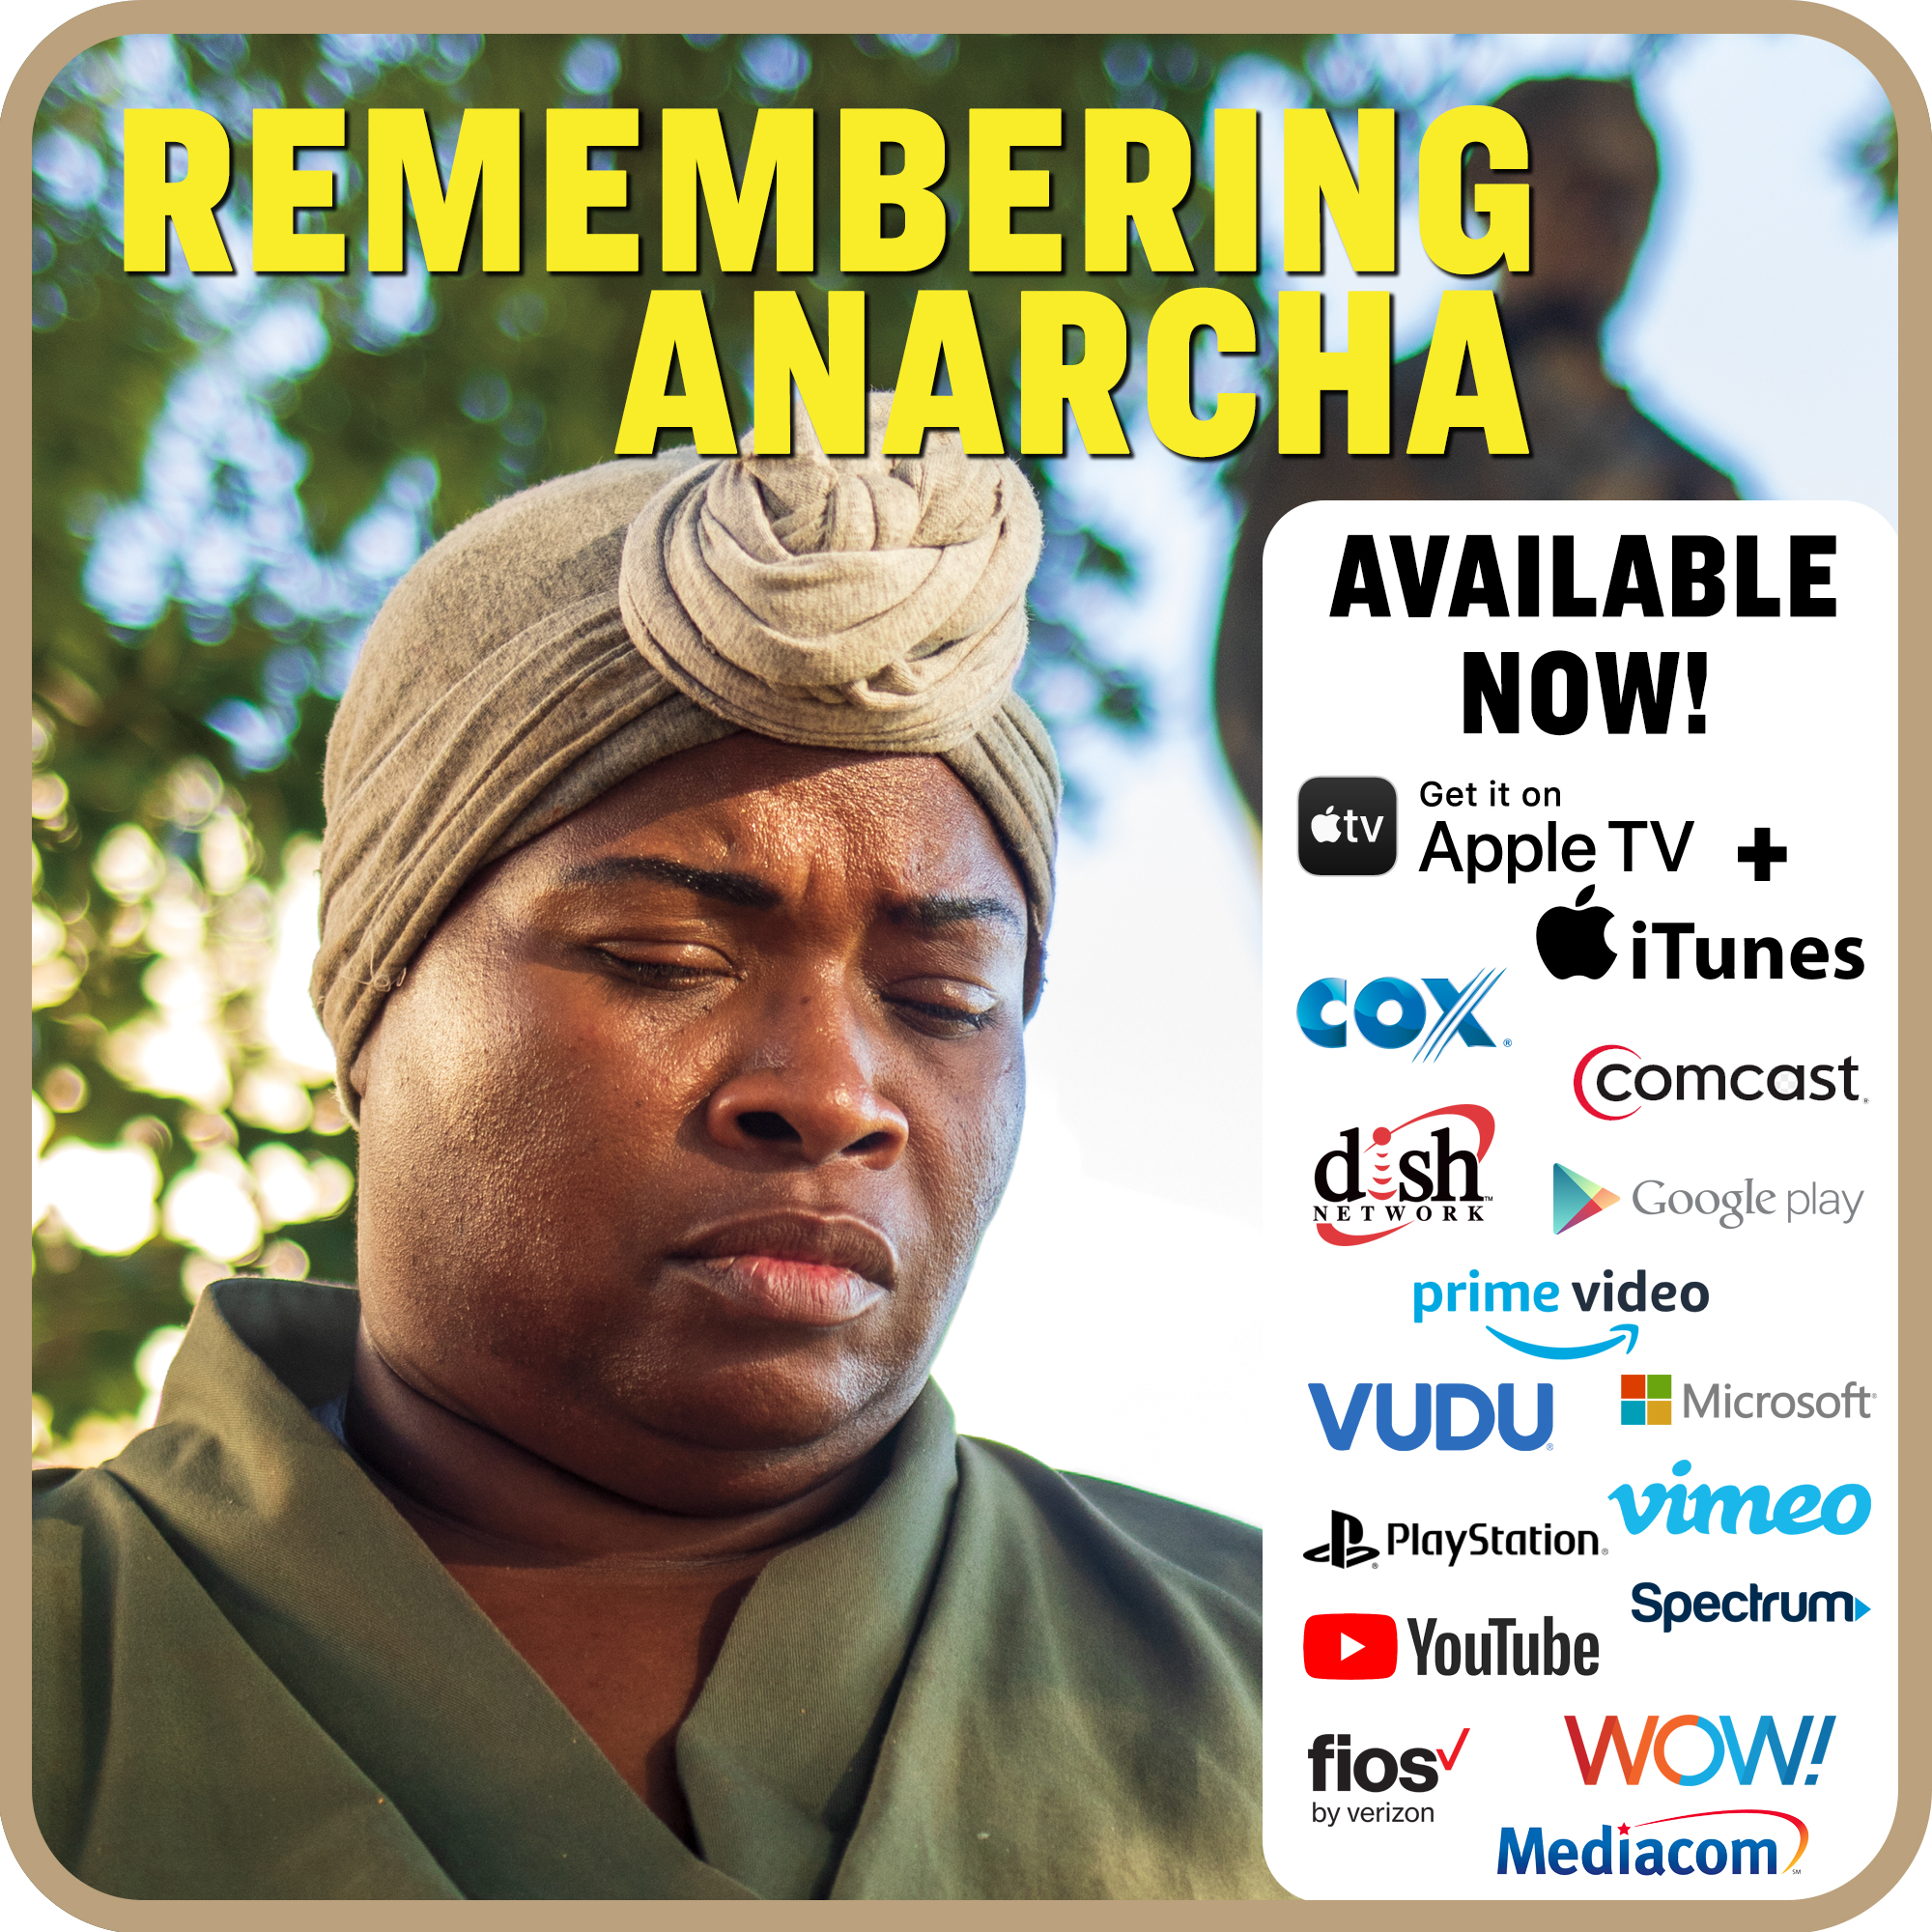 Remembering Anarcha now available on VOD!